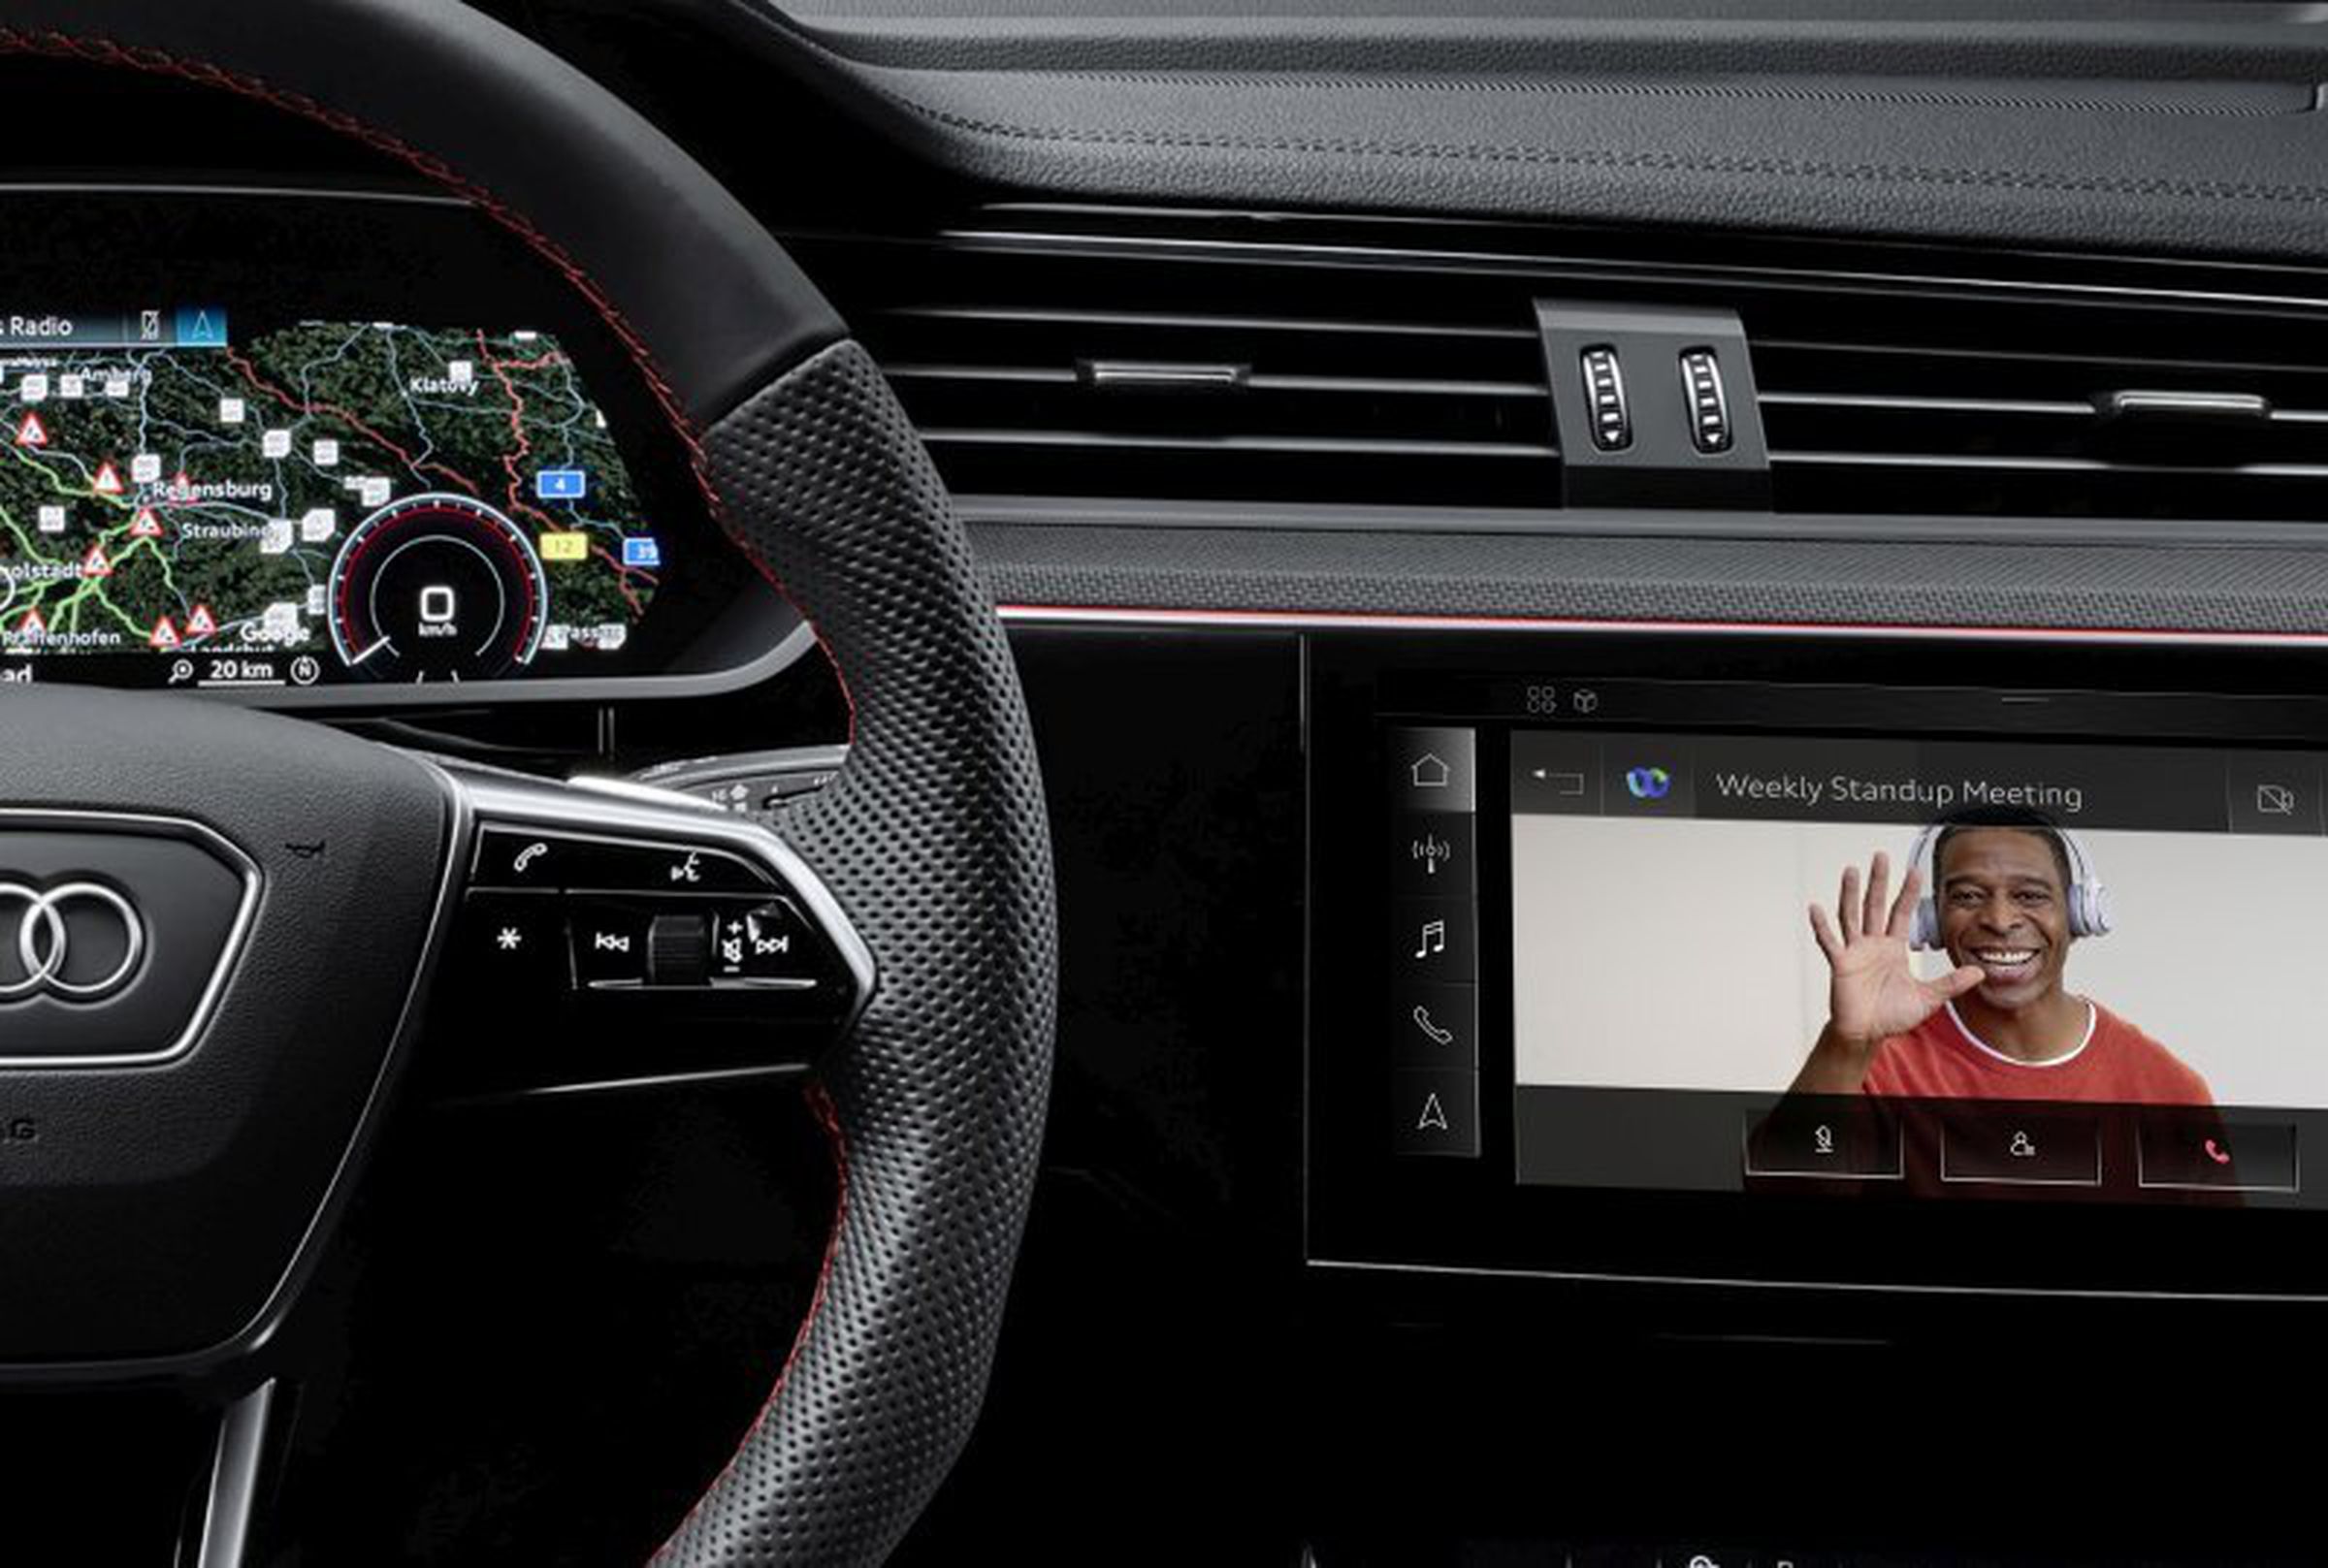 interior of Audi vehicle showing steering wheel, dash, and infotainment screen with man waving hand on the screen.